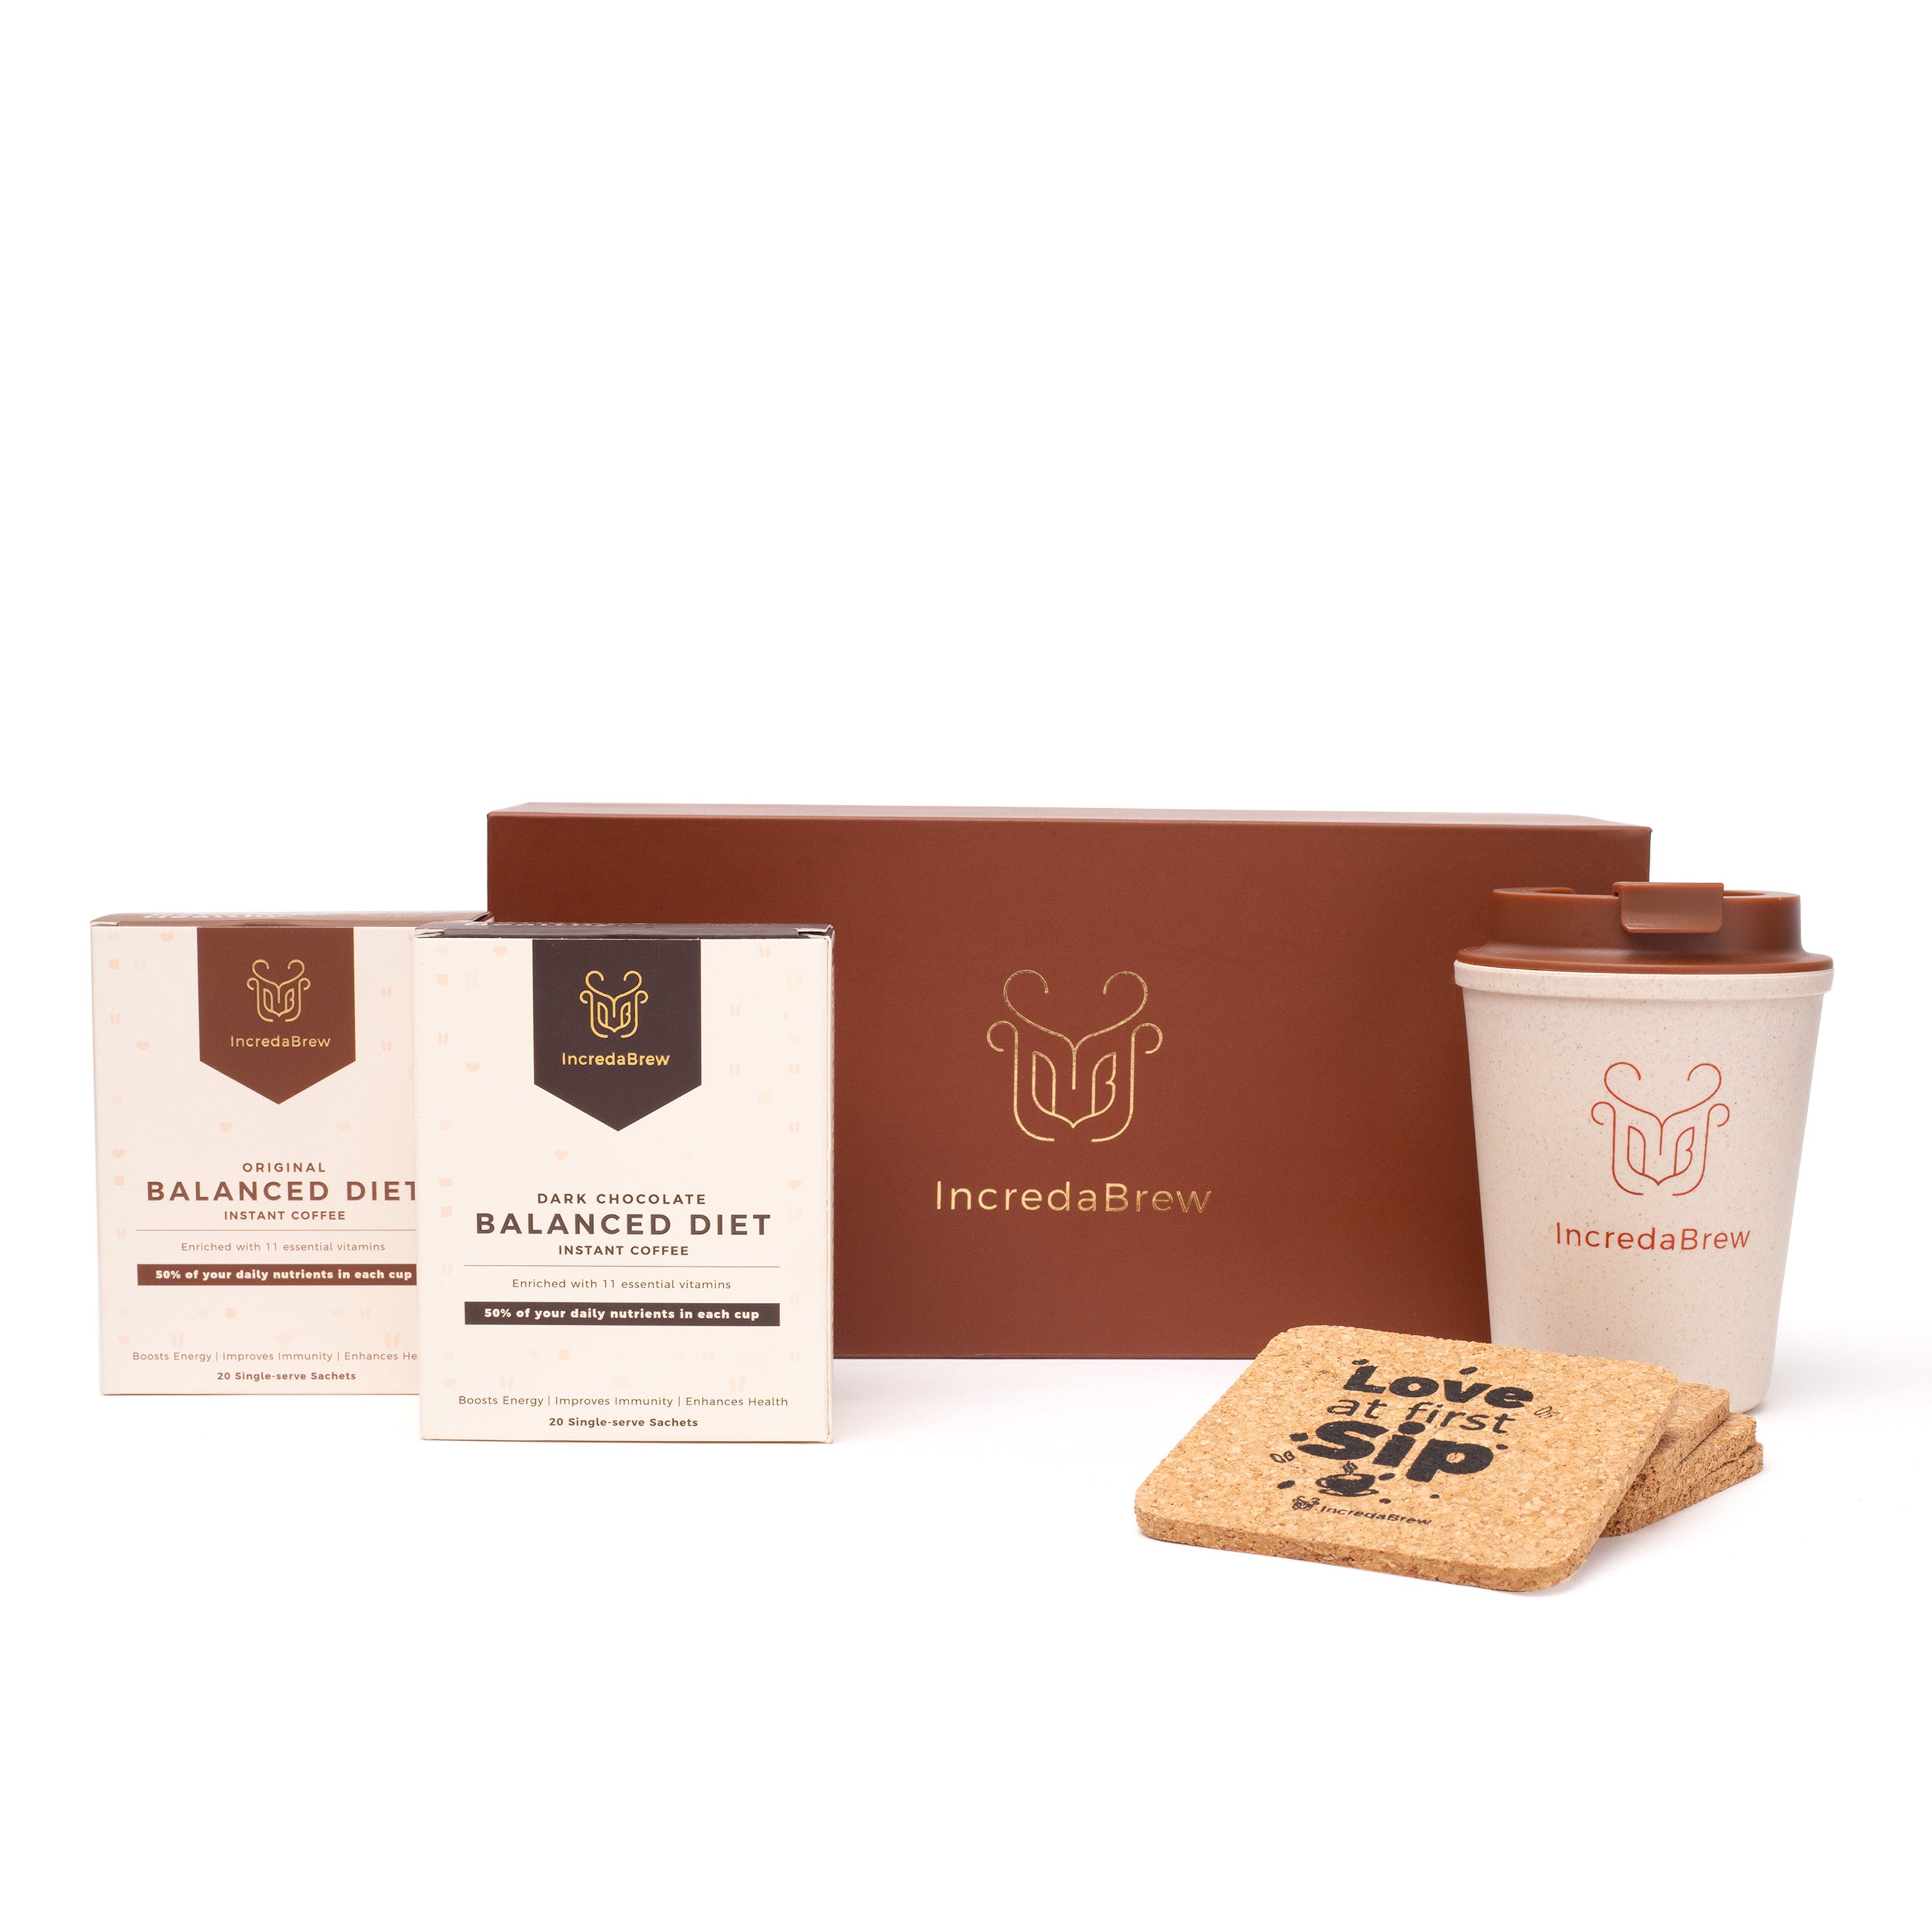 Incredabrew Any 2 Coffee Boxes, 1 Sipper & 4 Coasters Giftset